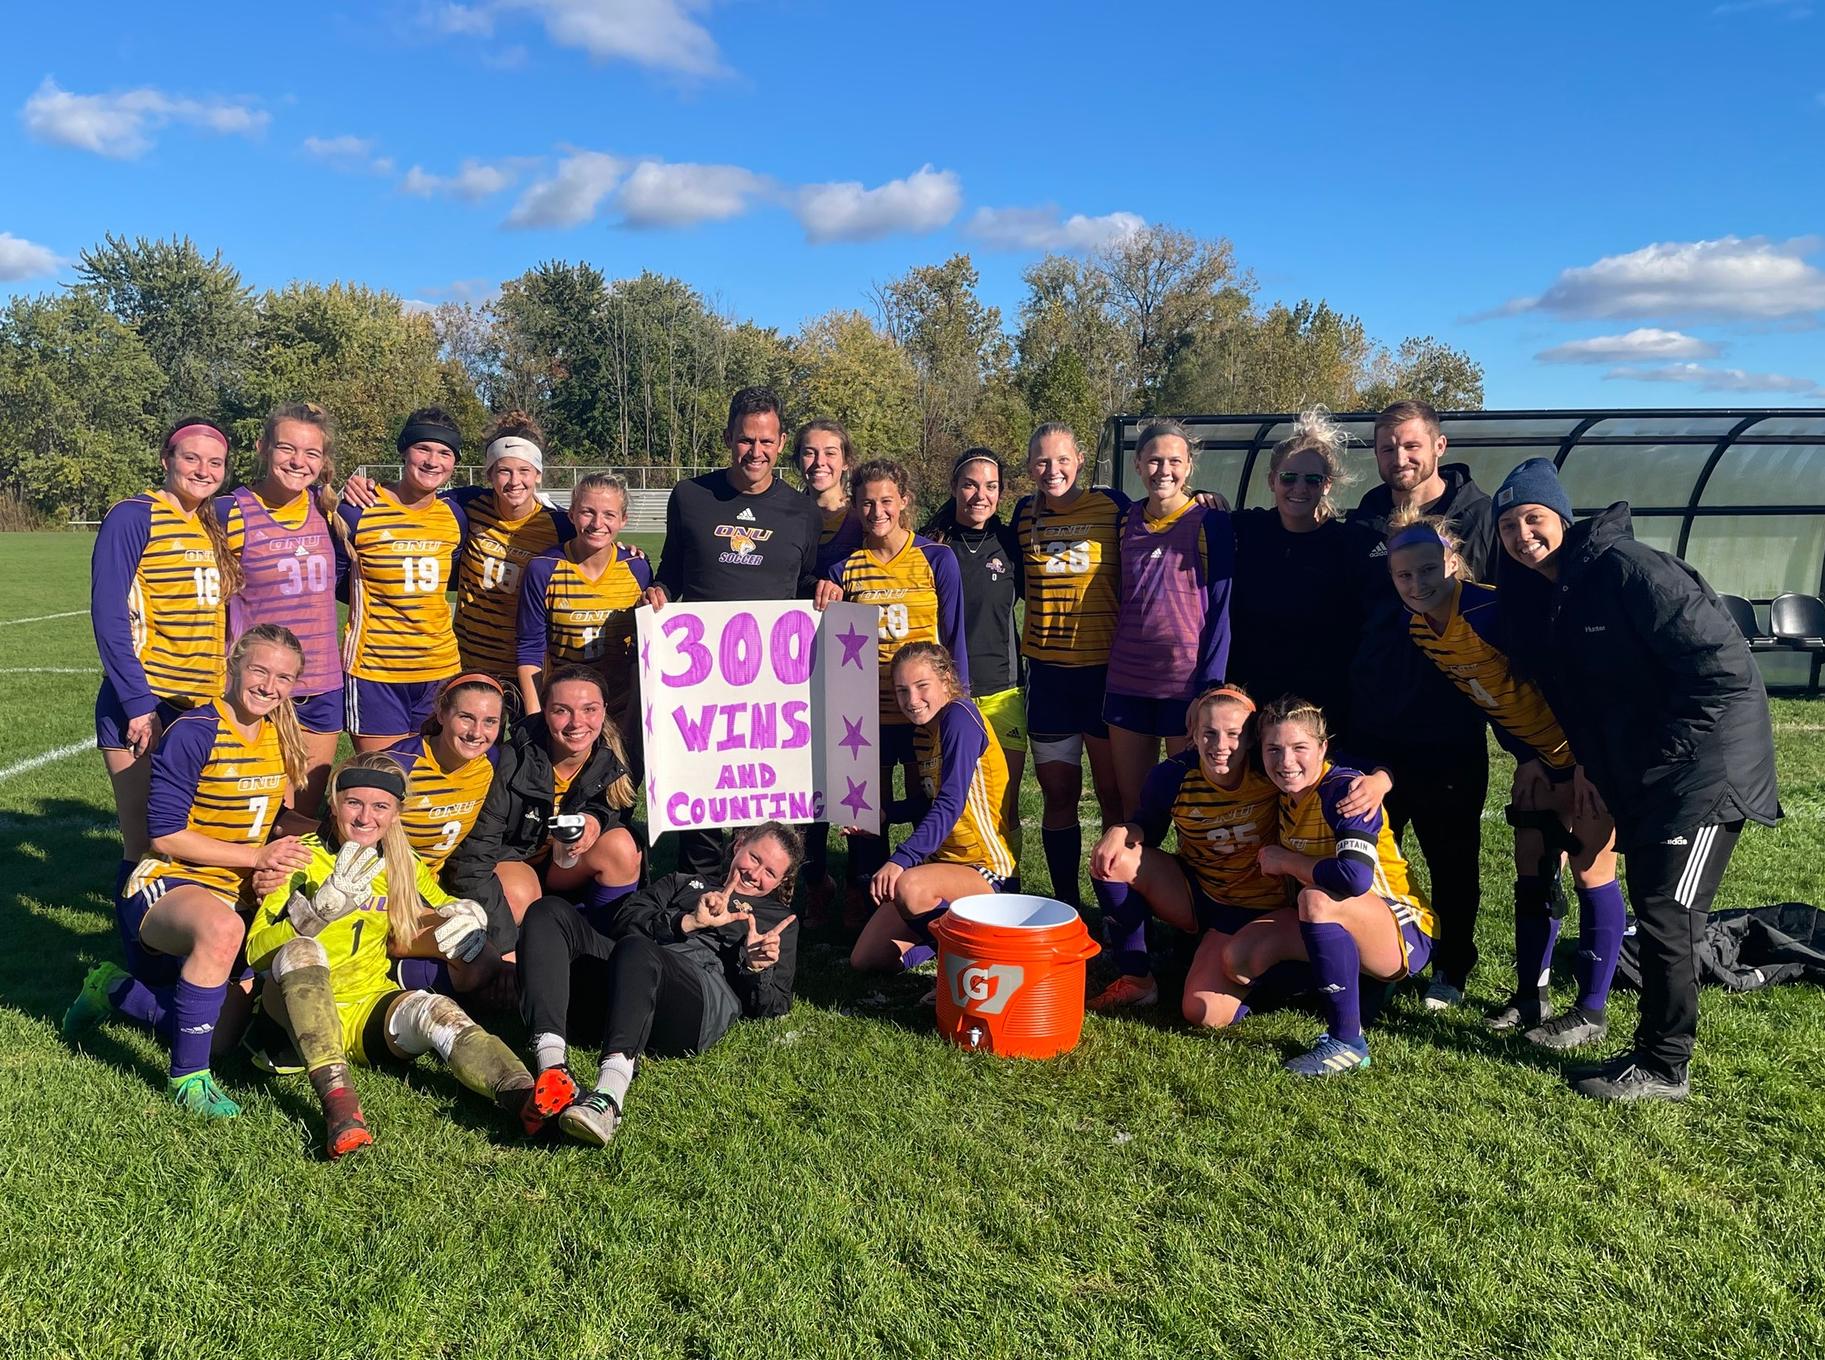 TIGERS HOLD ON TO WIN 1-0 OVER HOLY CROSS AS BAHR RECORDS 300th CAREER WIN